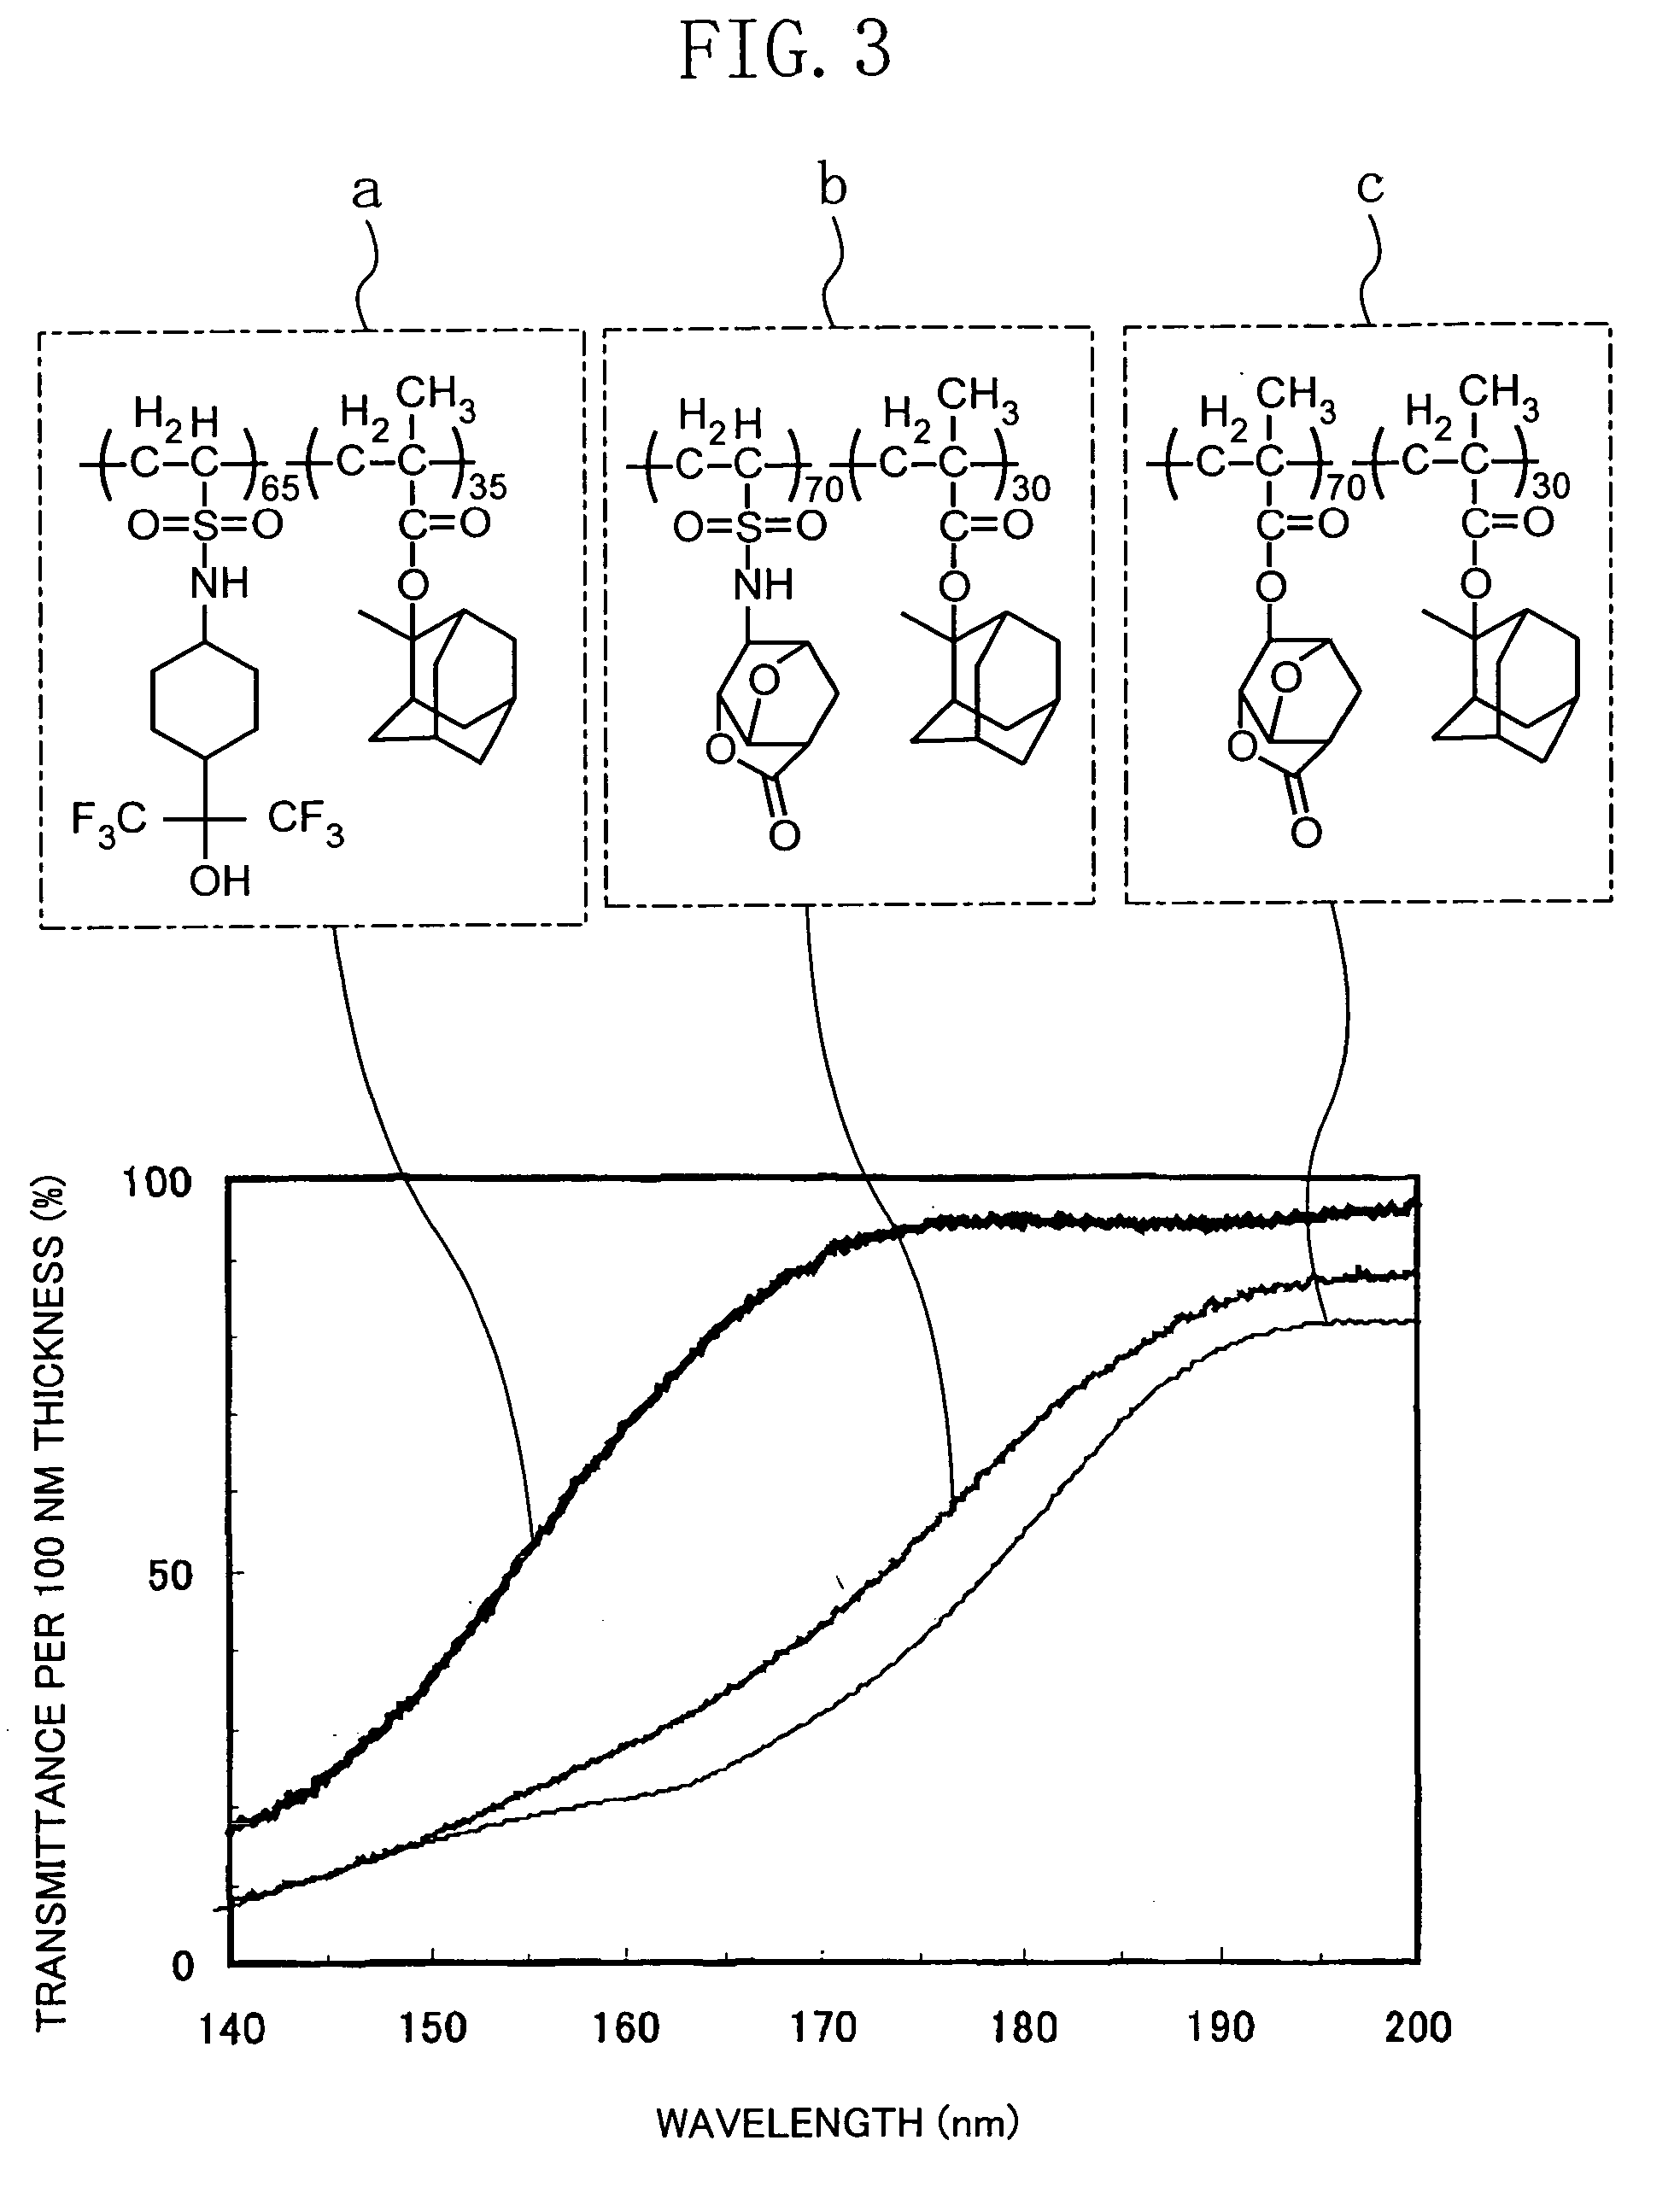 Resist material and pattern formation method